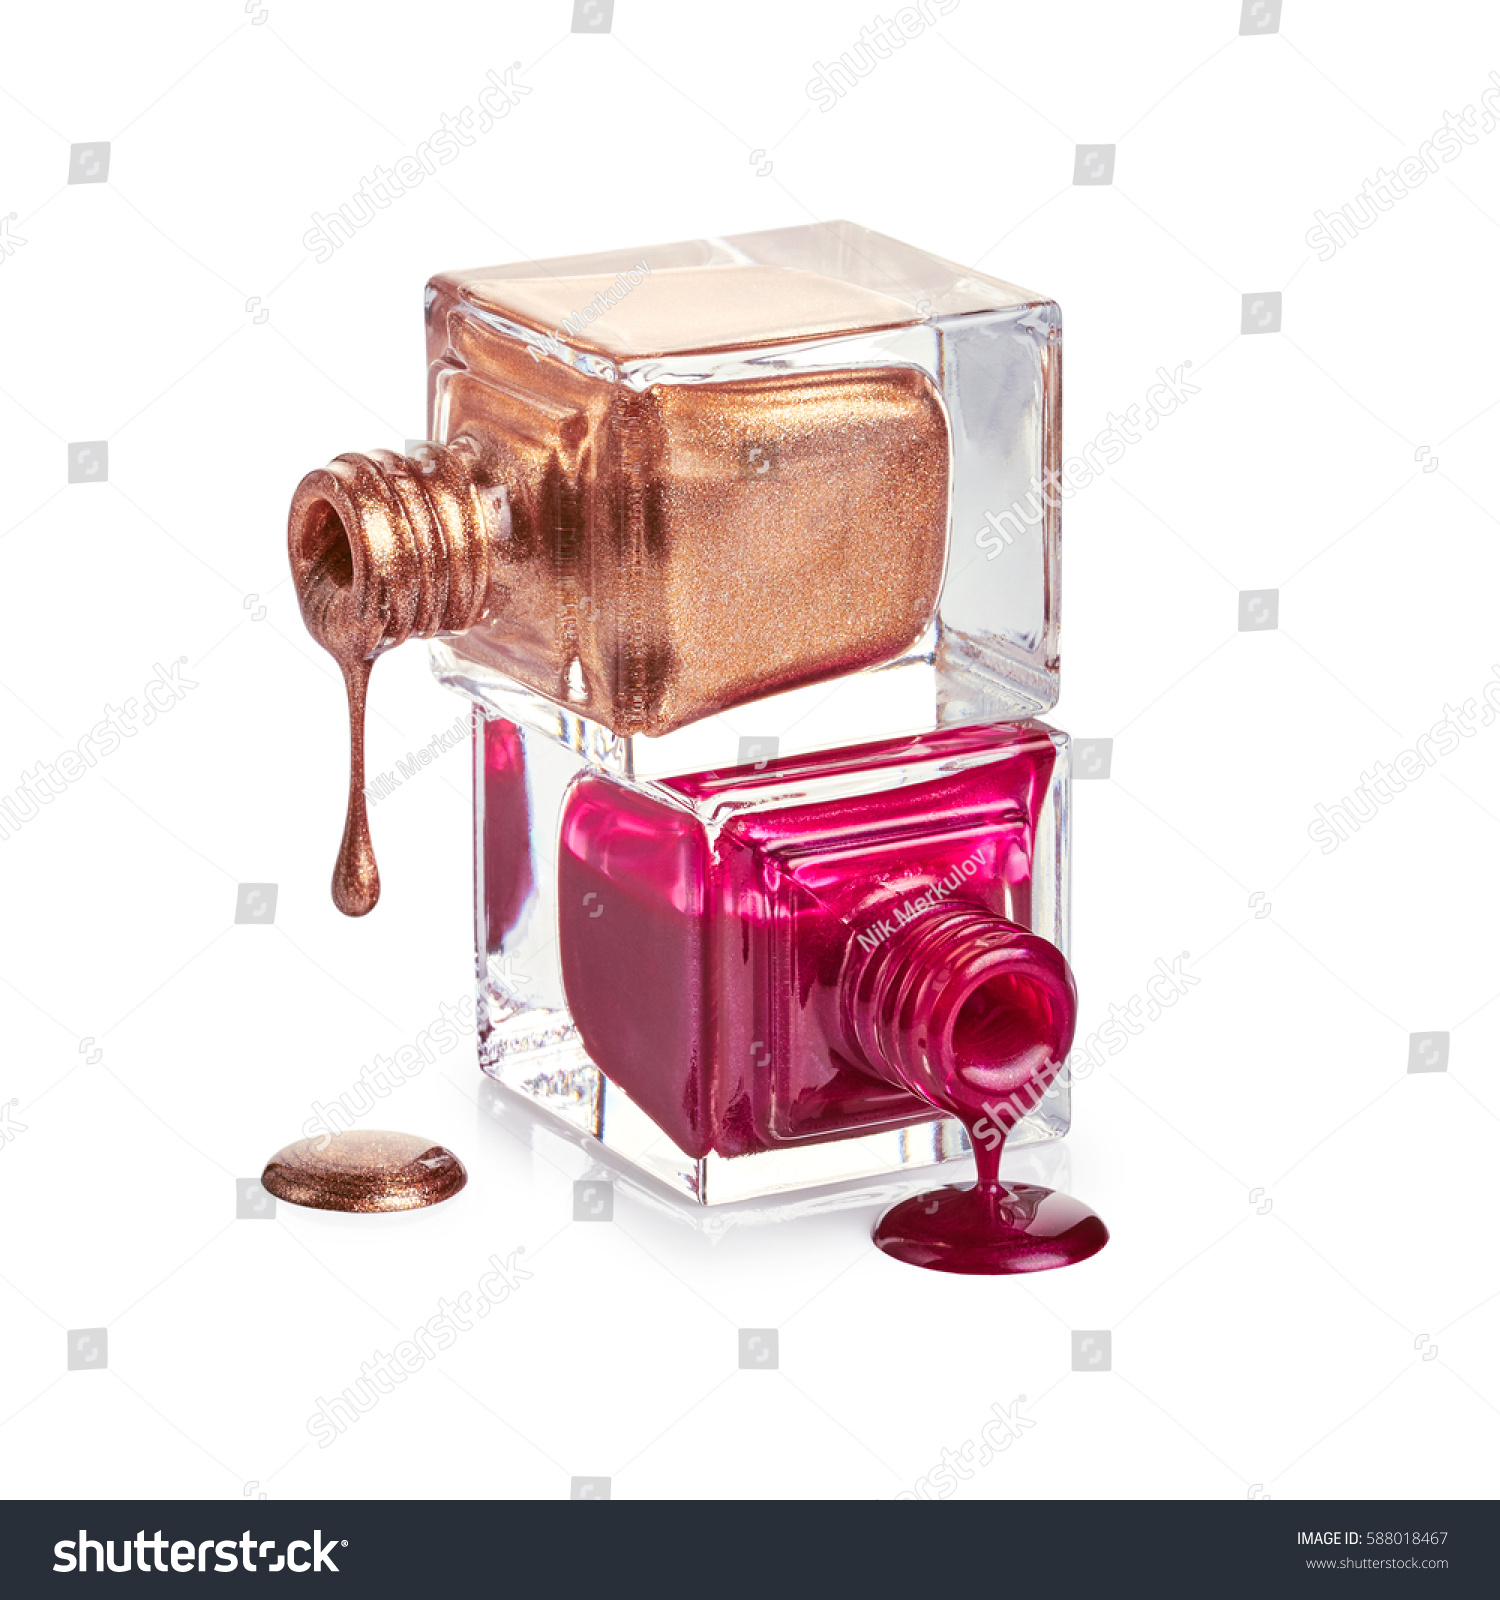 Bottles with spilled nail polish isolated on white background #588018467